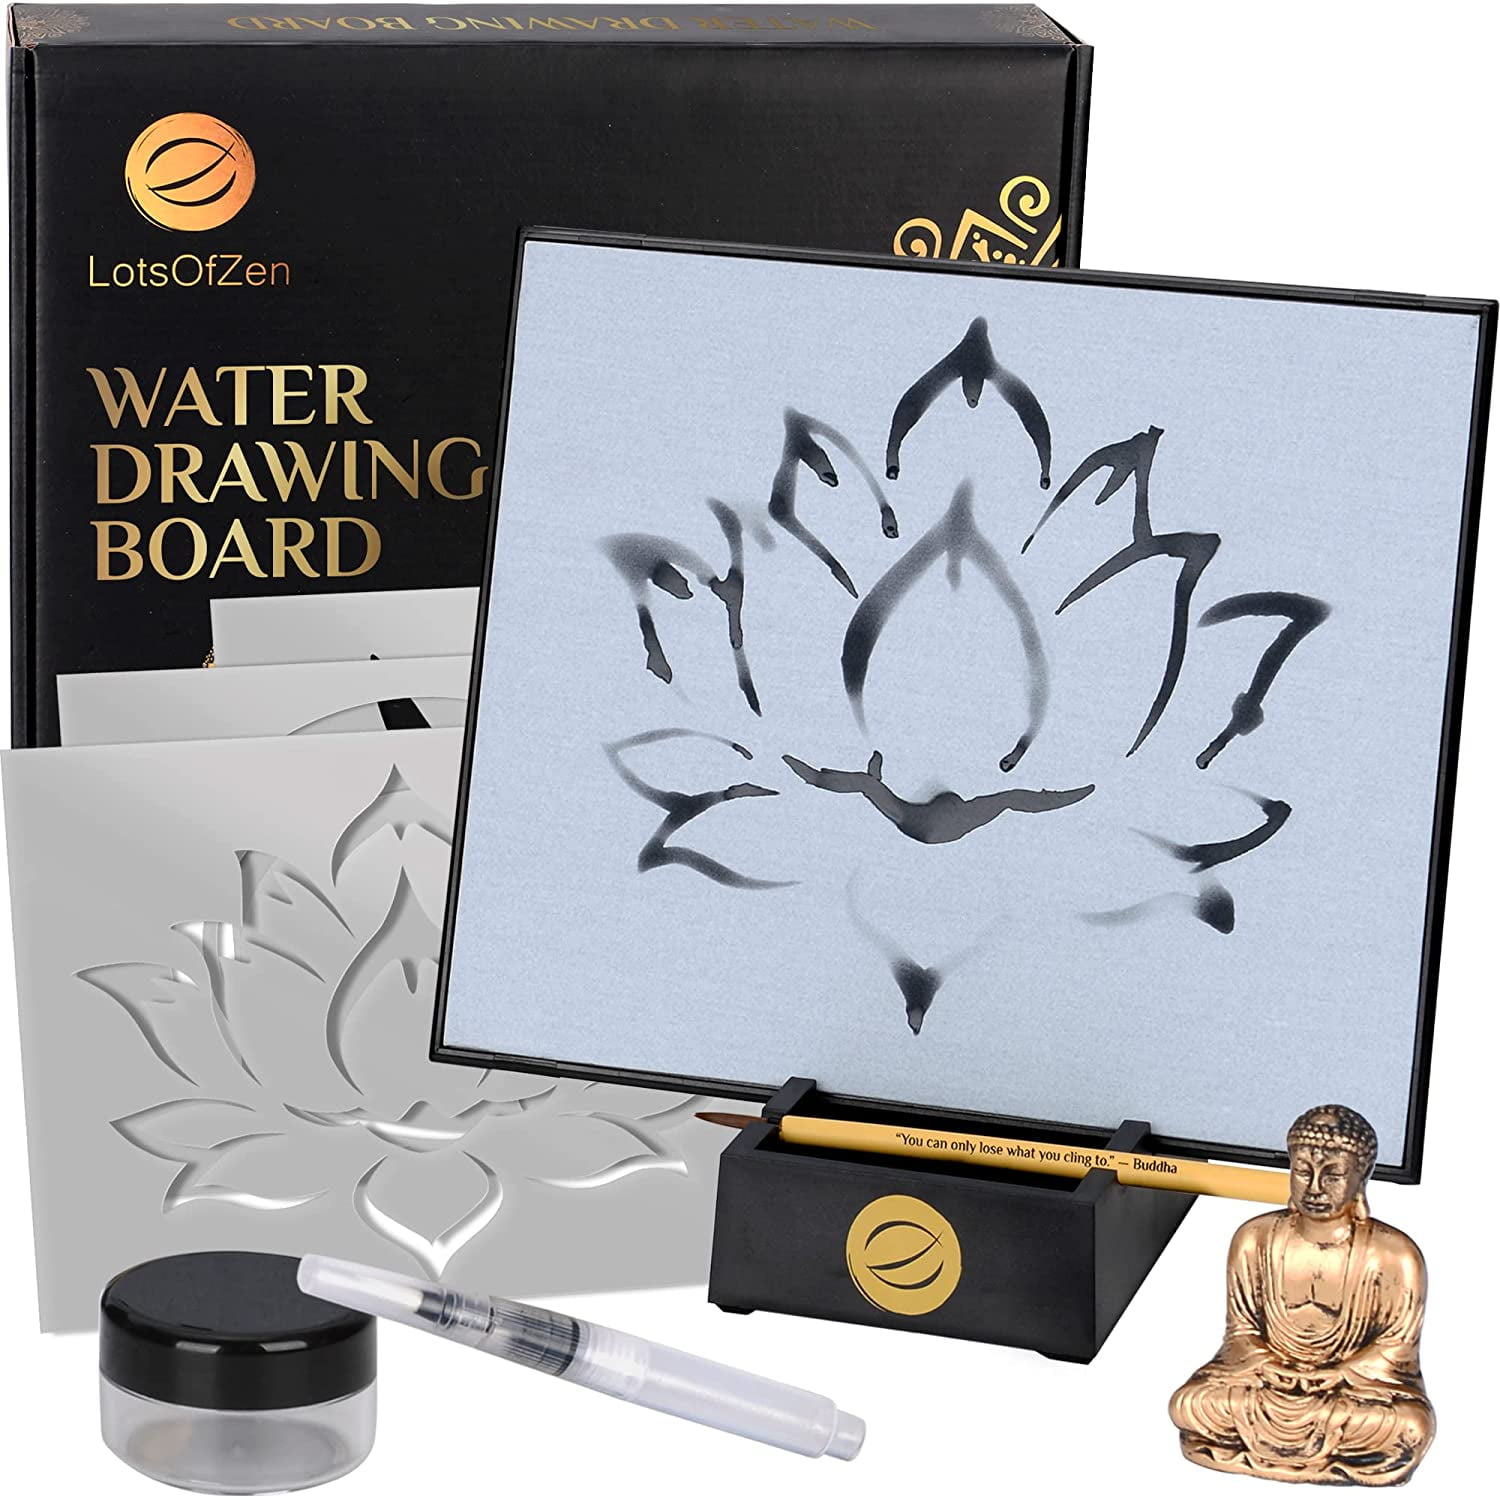 Water Painting Board - USA